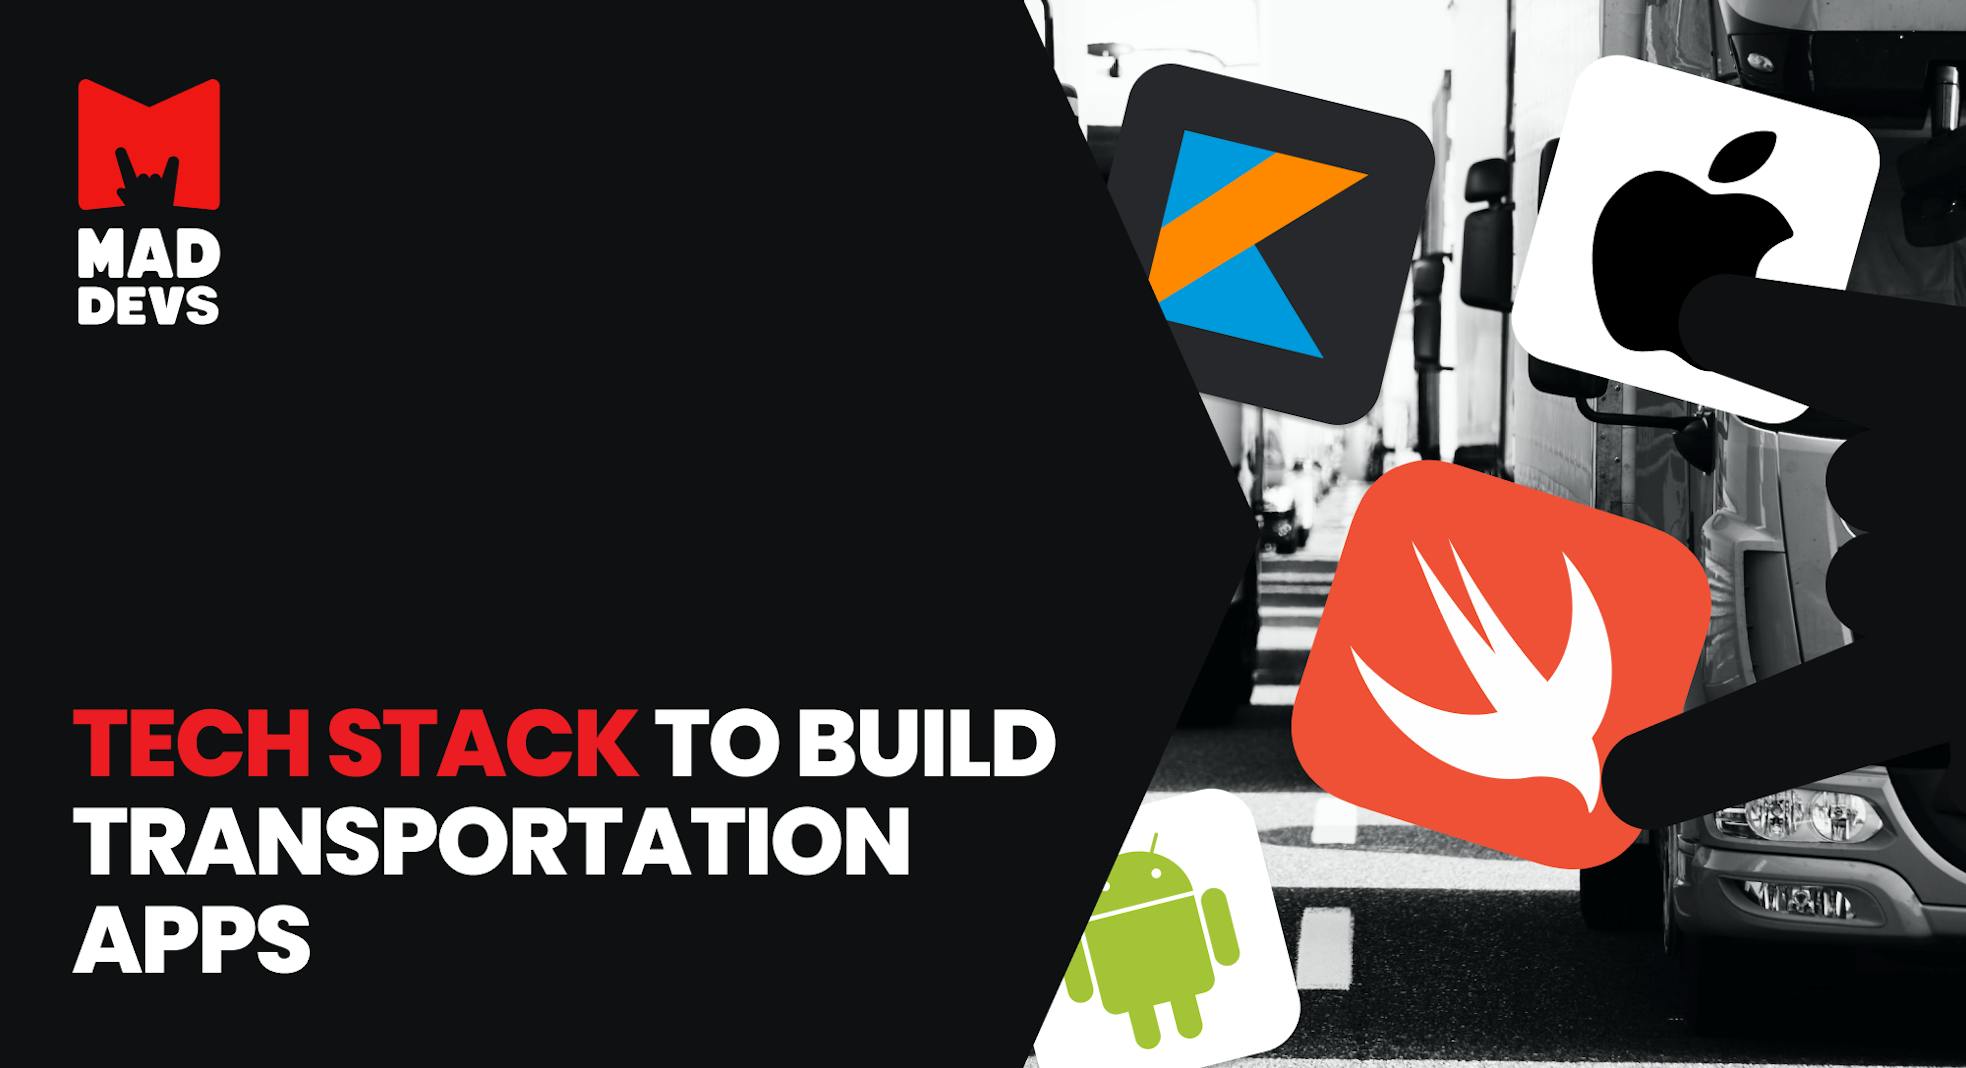 Tech Stack to Build Transportation Apps